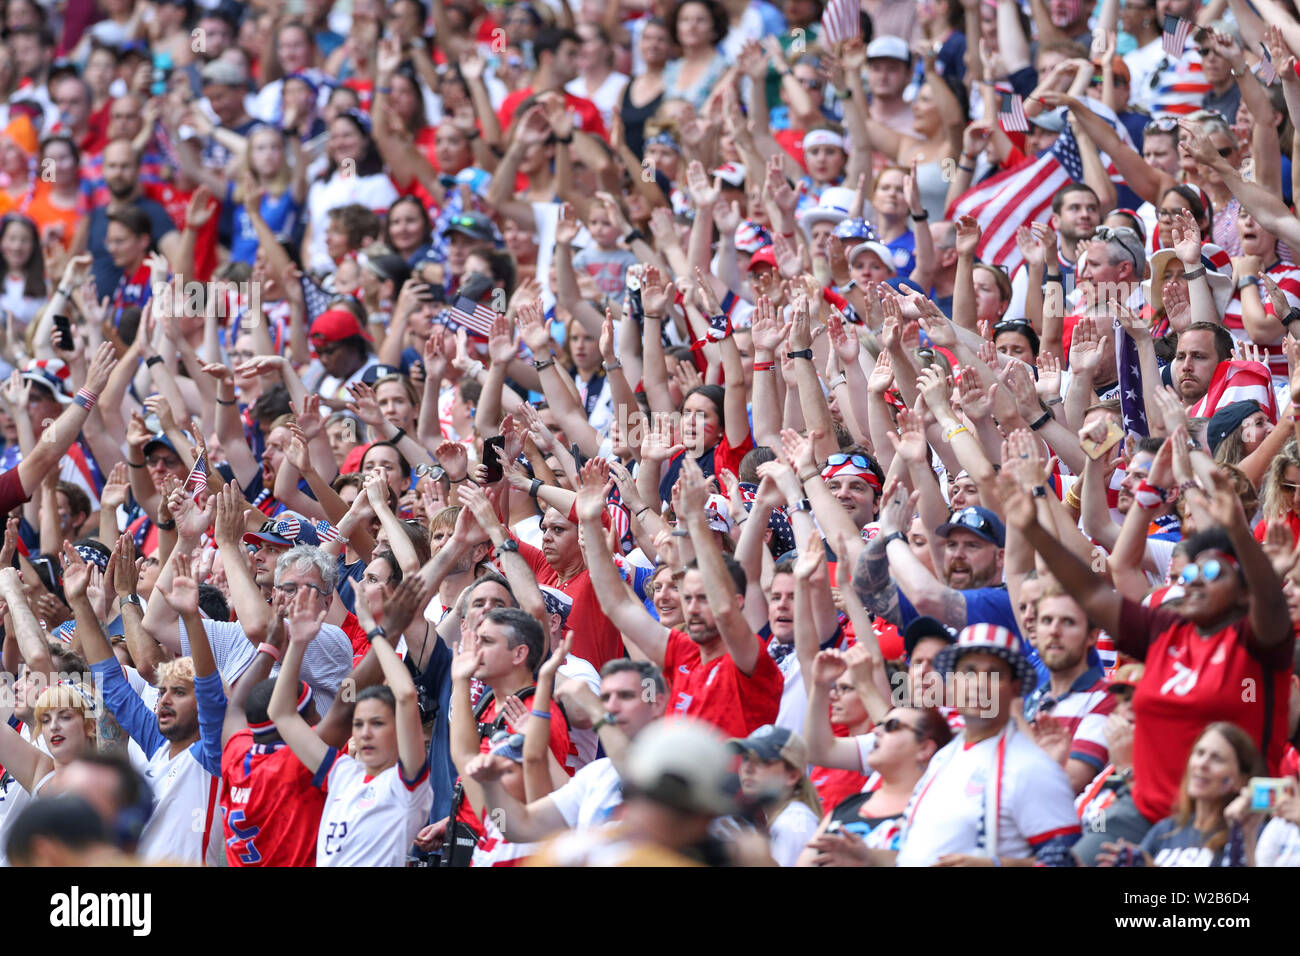 Lyon, France. 07th July, 2019. Fans the United States during match against the Netherlands game valid for the Final of the Women 's Soccer World Cup in Lyon in France this Sunday, 07. Credit: Brazil Photo Press/Alamy Live News Stock Photo